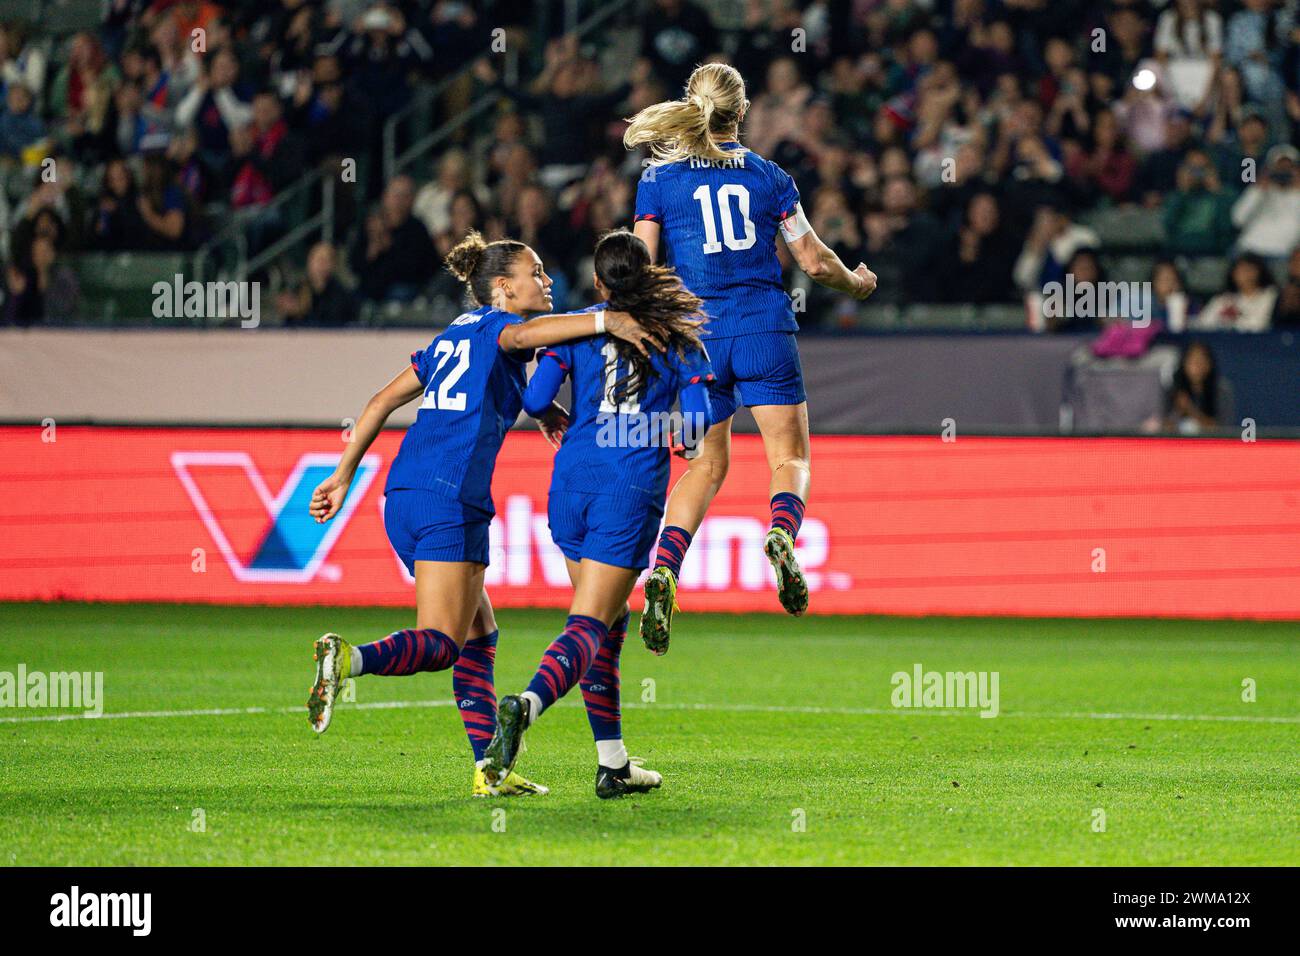 United States midfielder Lindsey Horan (10) celebrates a goal during the Concacaf W Gold Cup Group A match against Argentina, Friday, February 23, 202 Stock Photo